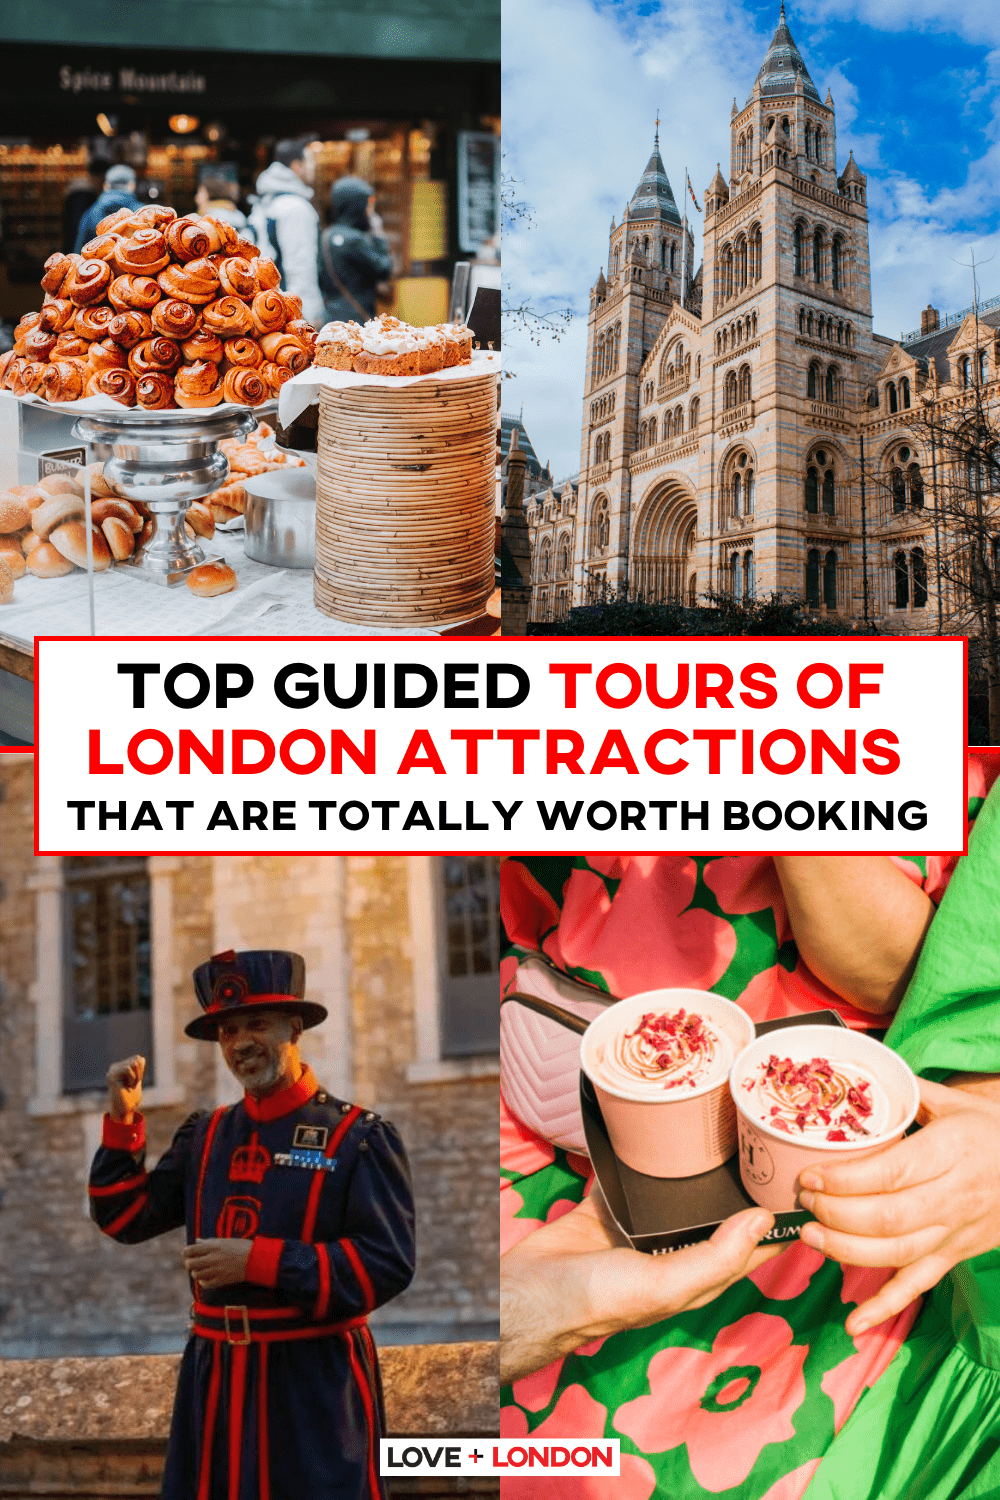 Top Guided Tours of London Attractions that are Totally Worth Booking